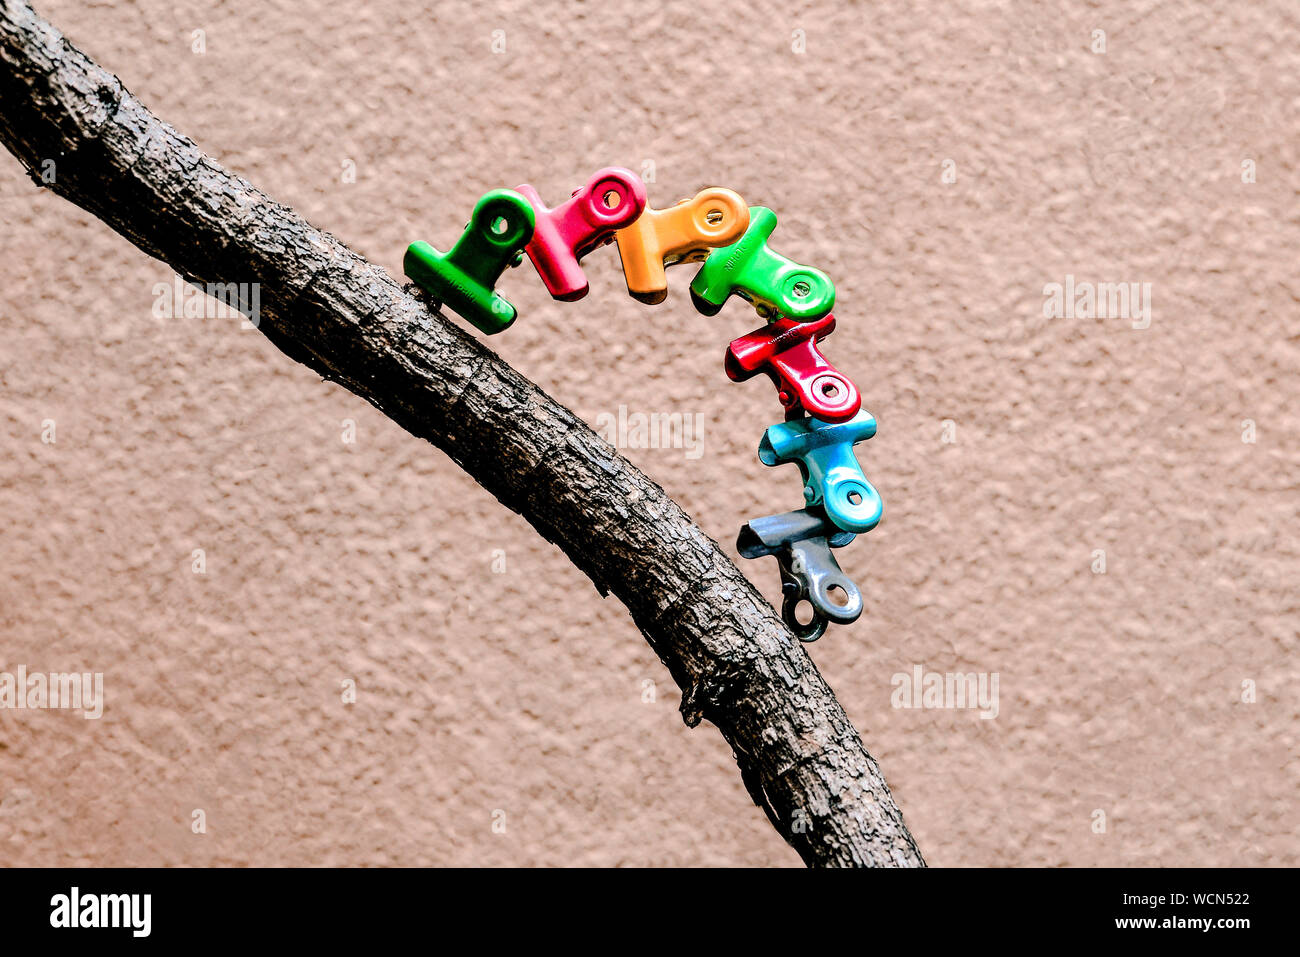 Low Angle View Of Paper Clips Arranged On Plant Stem Against Wall Stock Photo